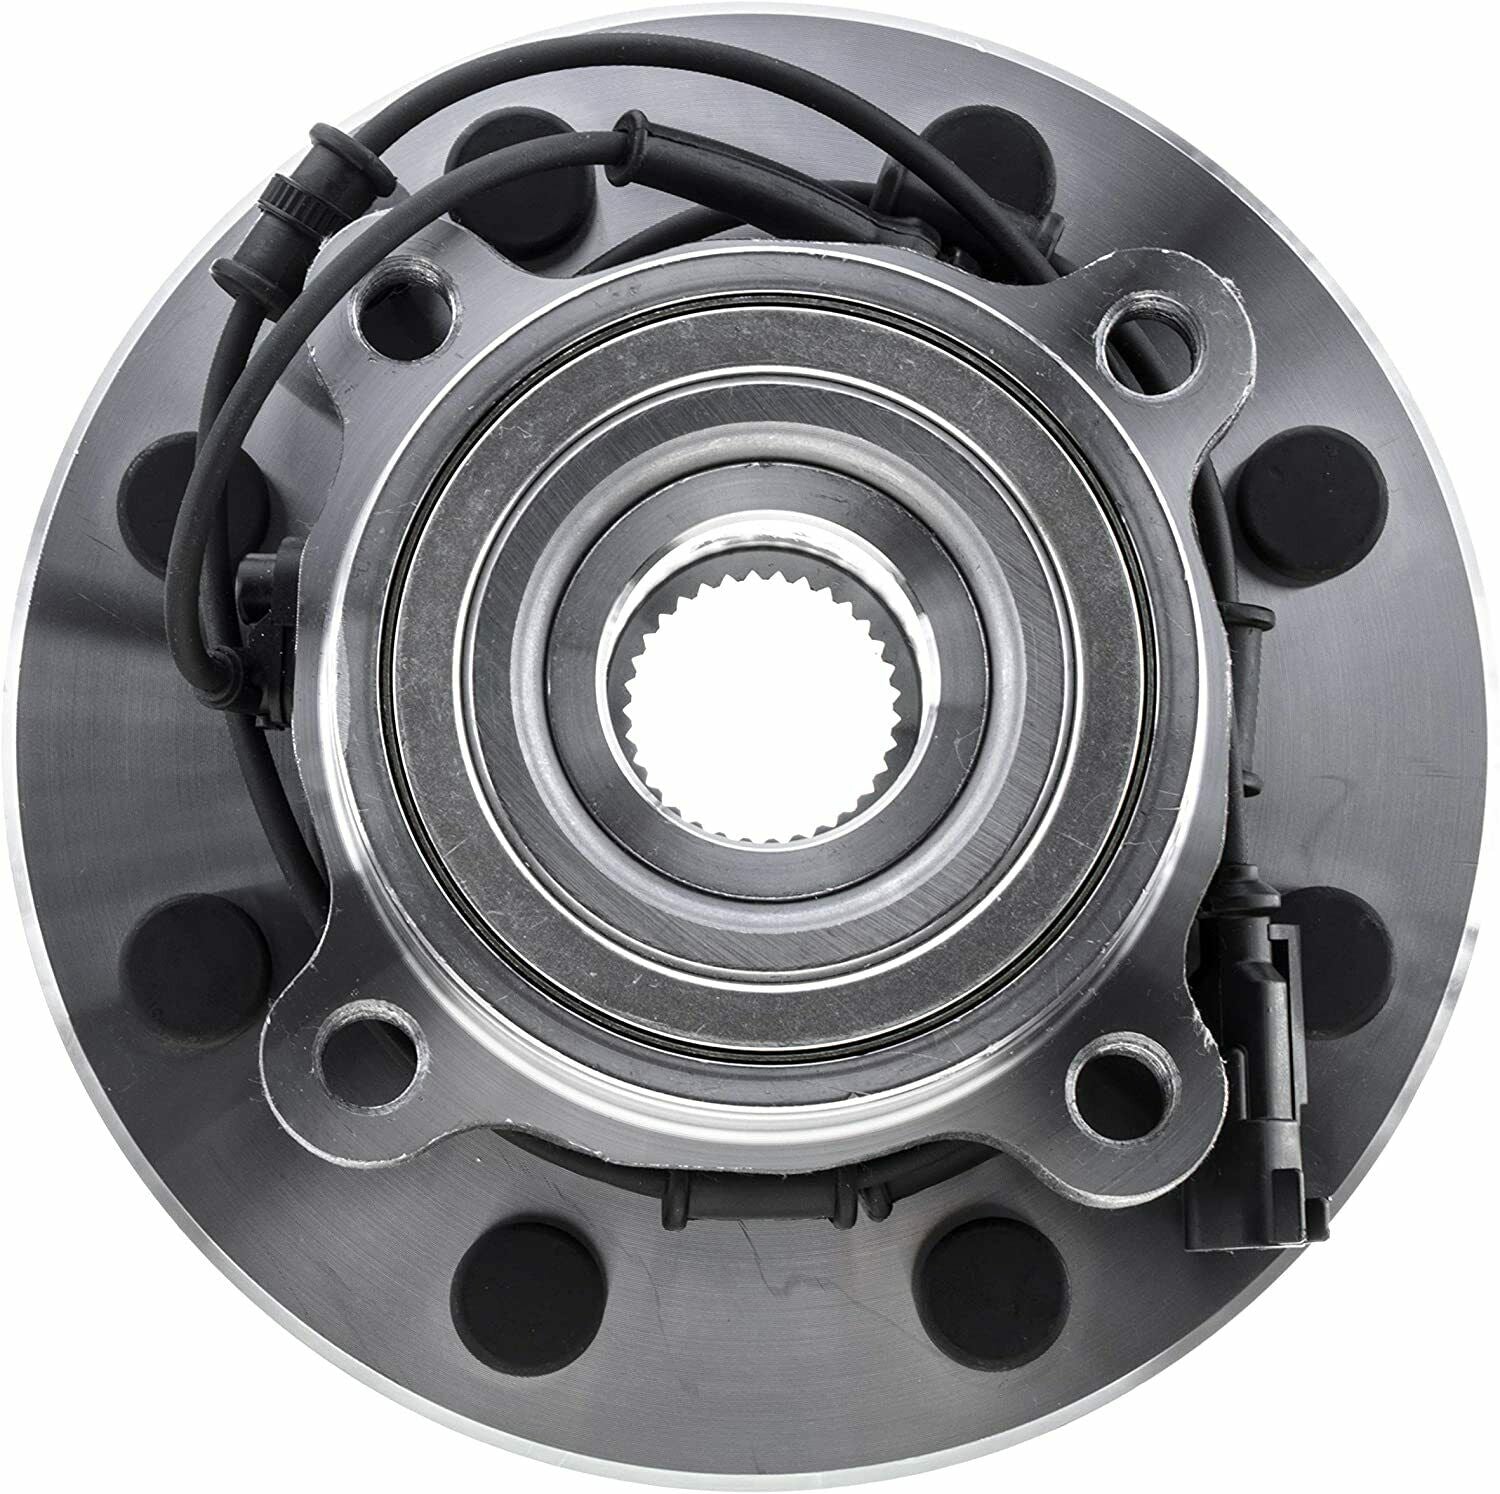 JADODE 515101 Front Left or Right Wheel Hub Bearing Assembly for Dodge Ram 1500 2500 3500